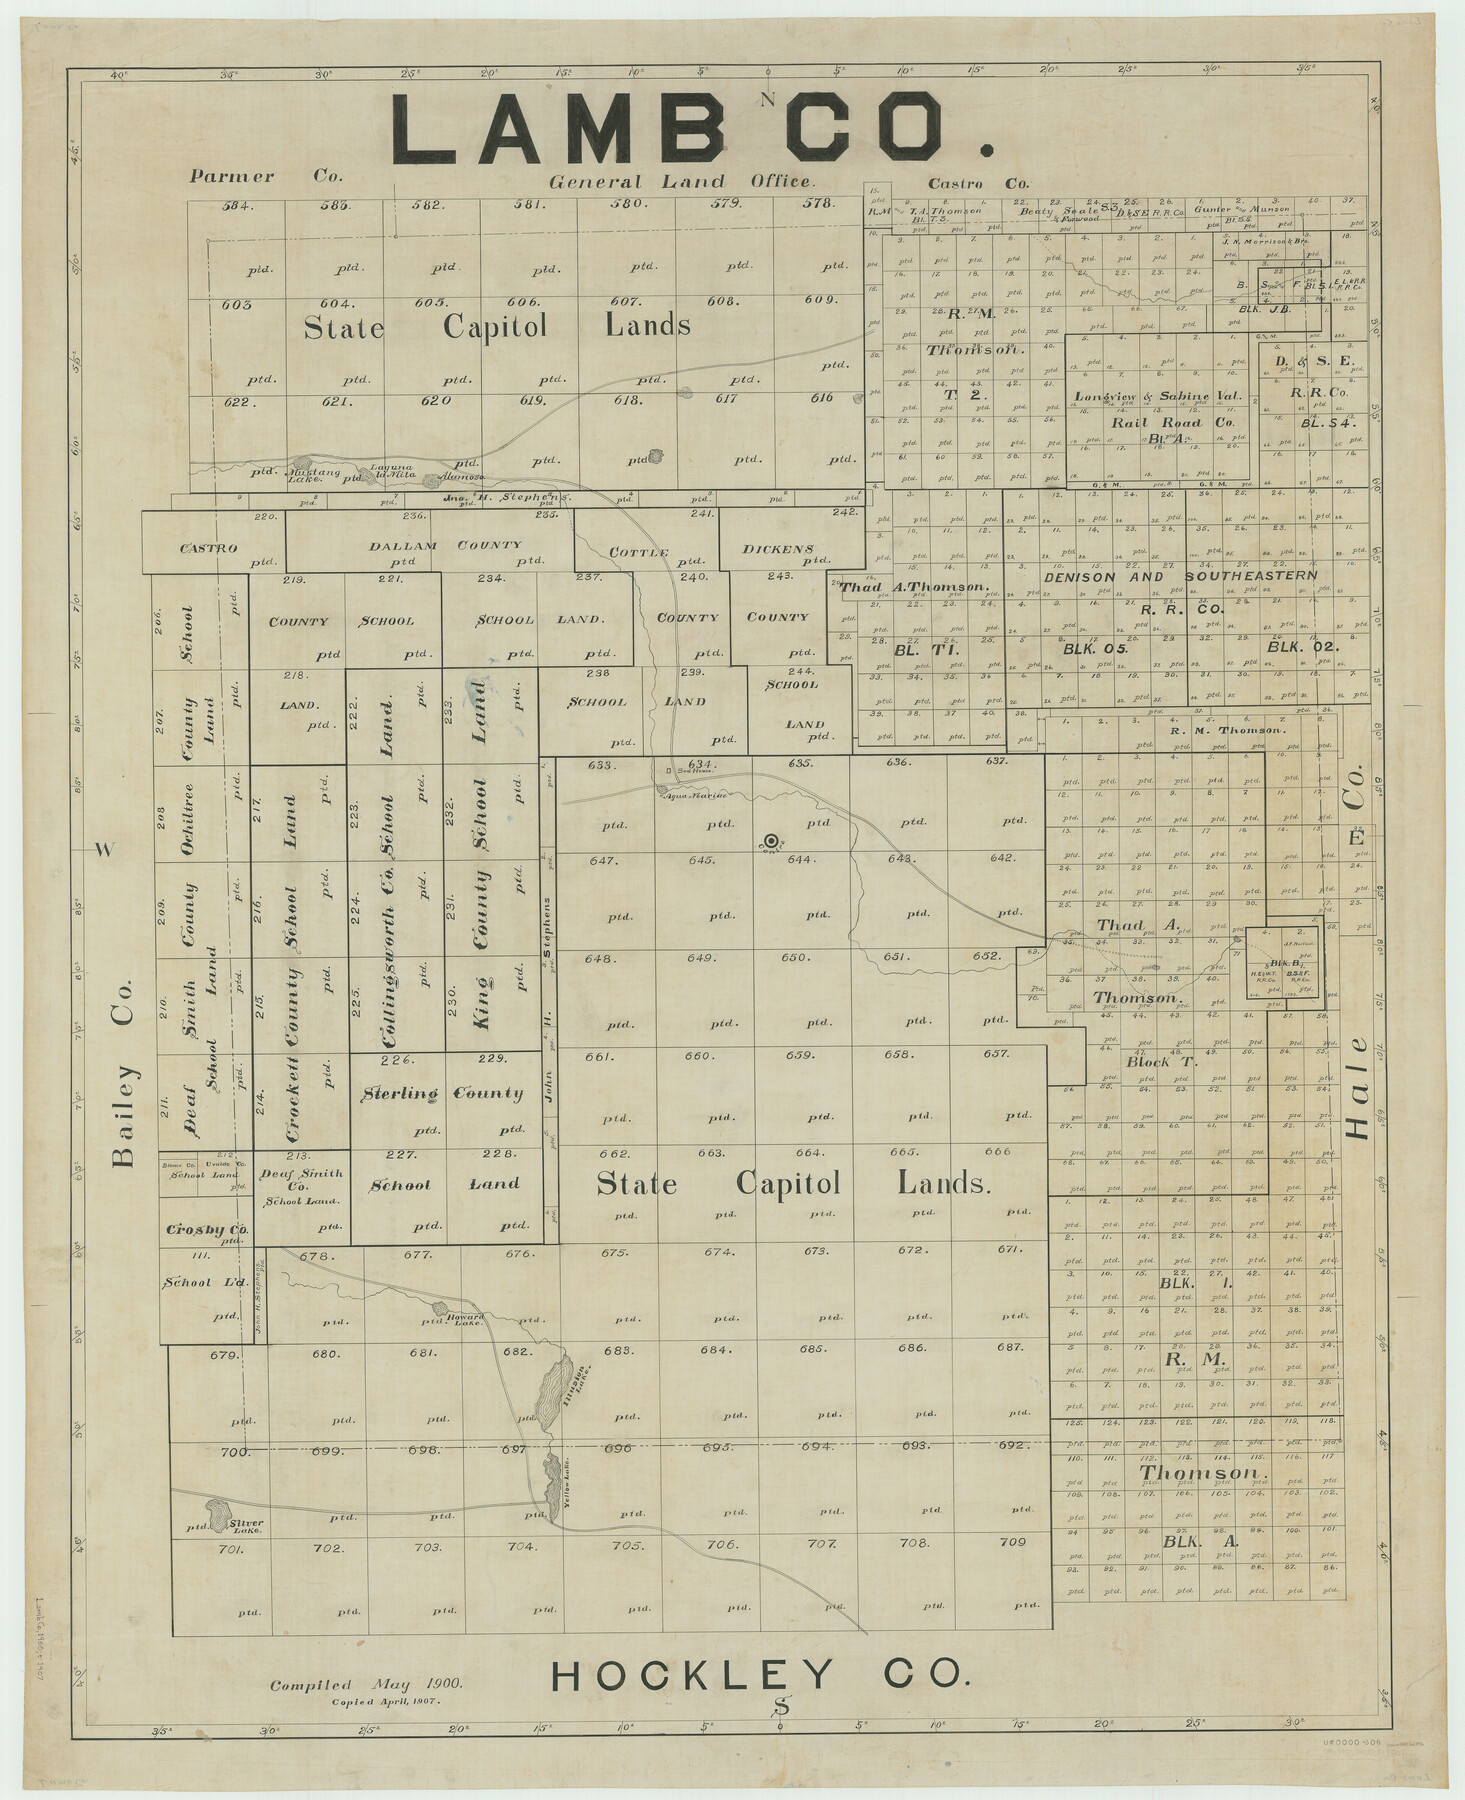 66896, Lamb Co., General Map Collection